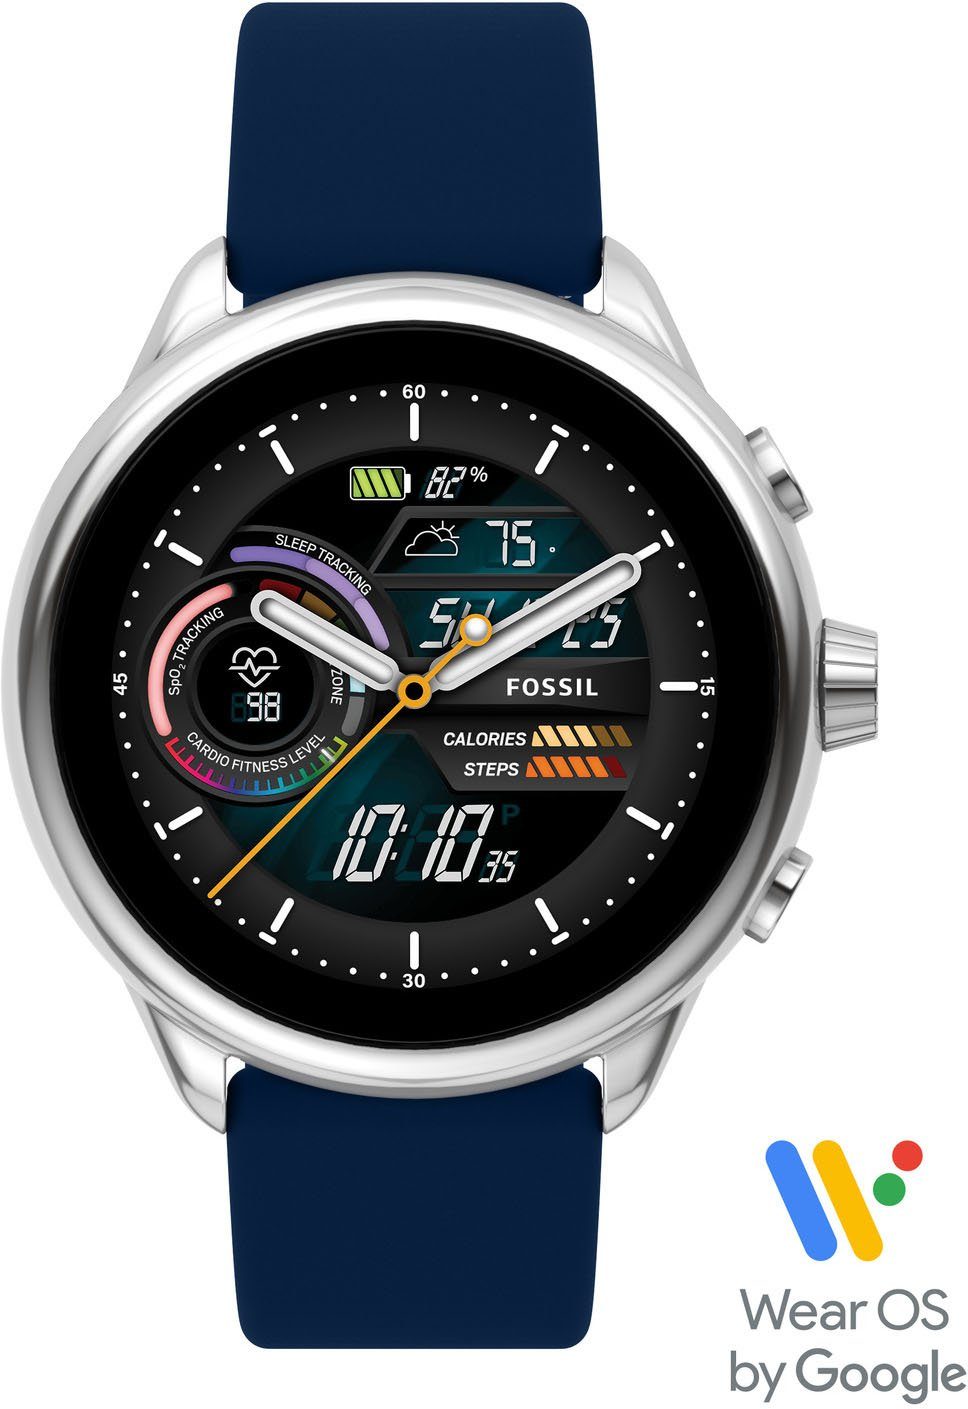 Fossil Smartwatches Fossil Gen 6 Display Wellness Edition, FTW4070 Smartwatch (Wear OS by Google)